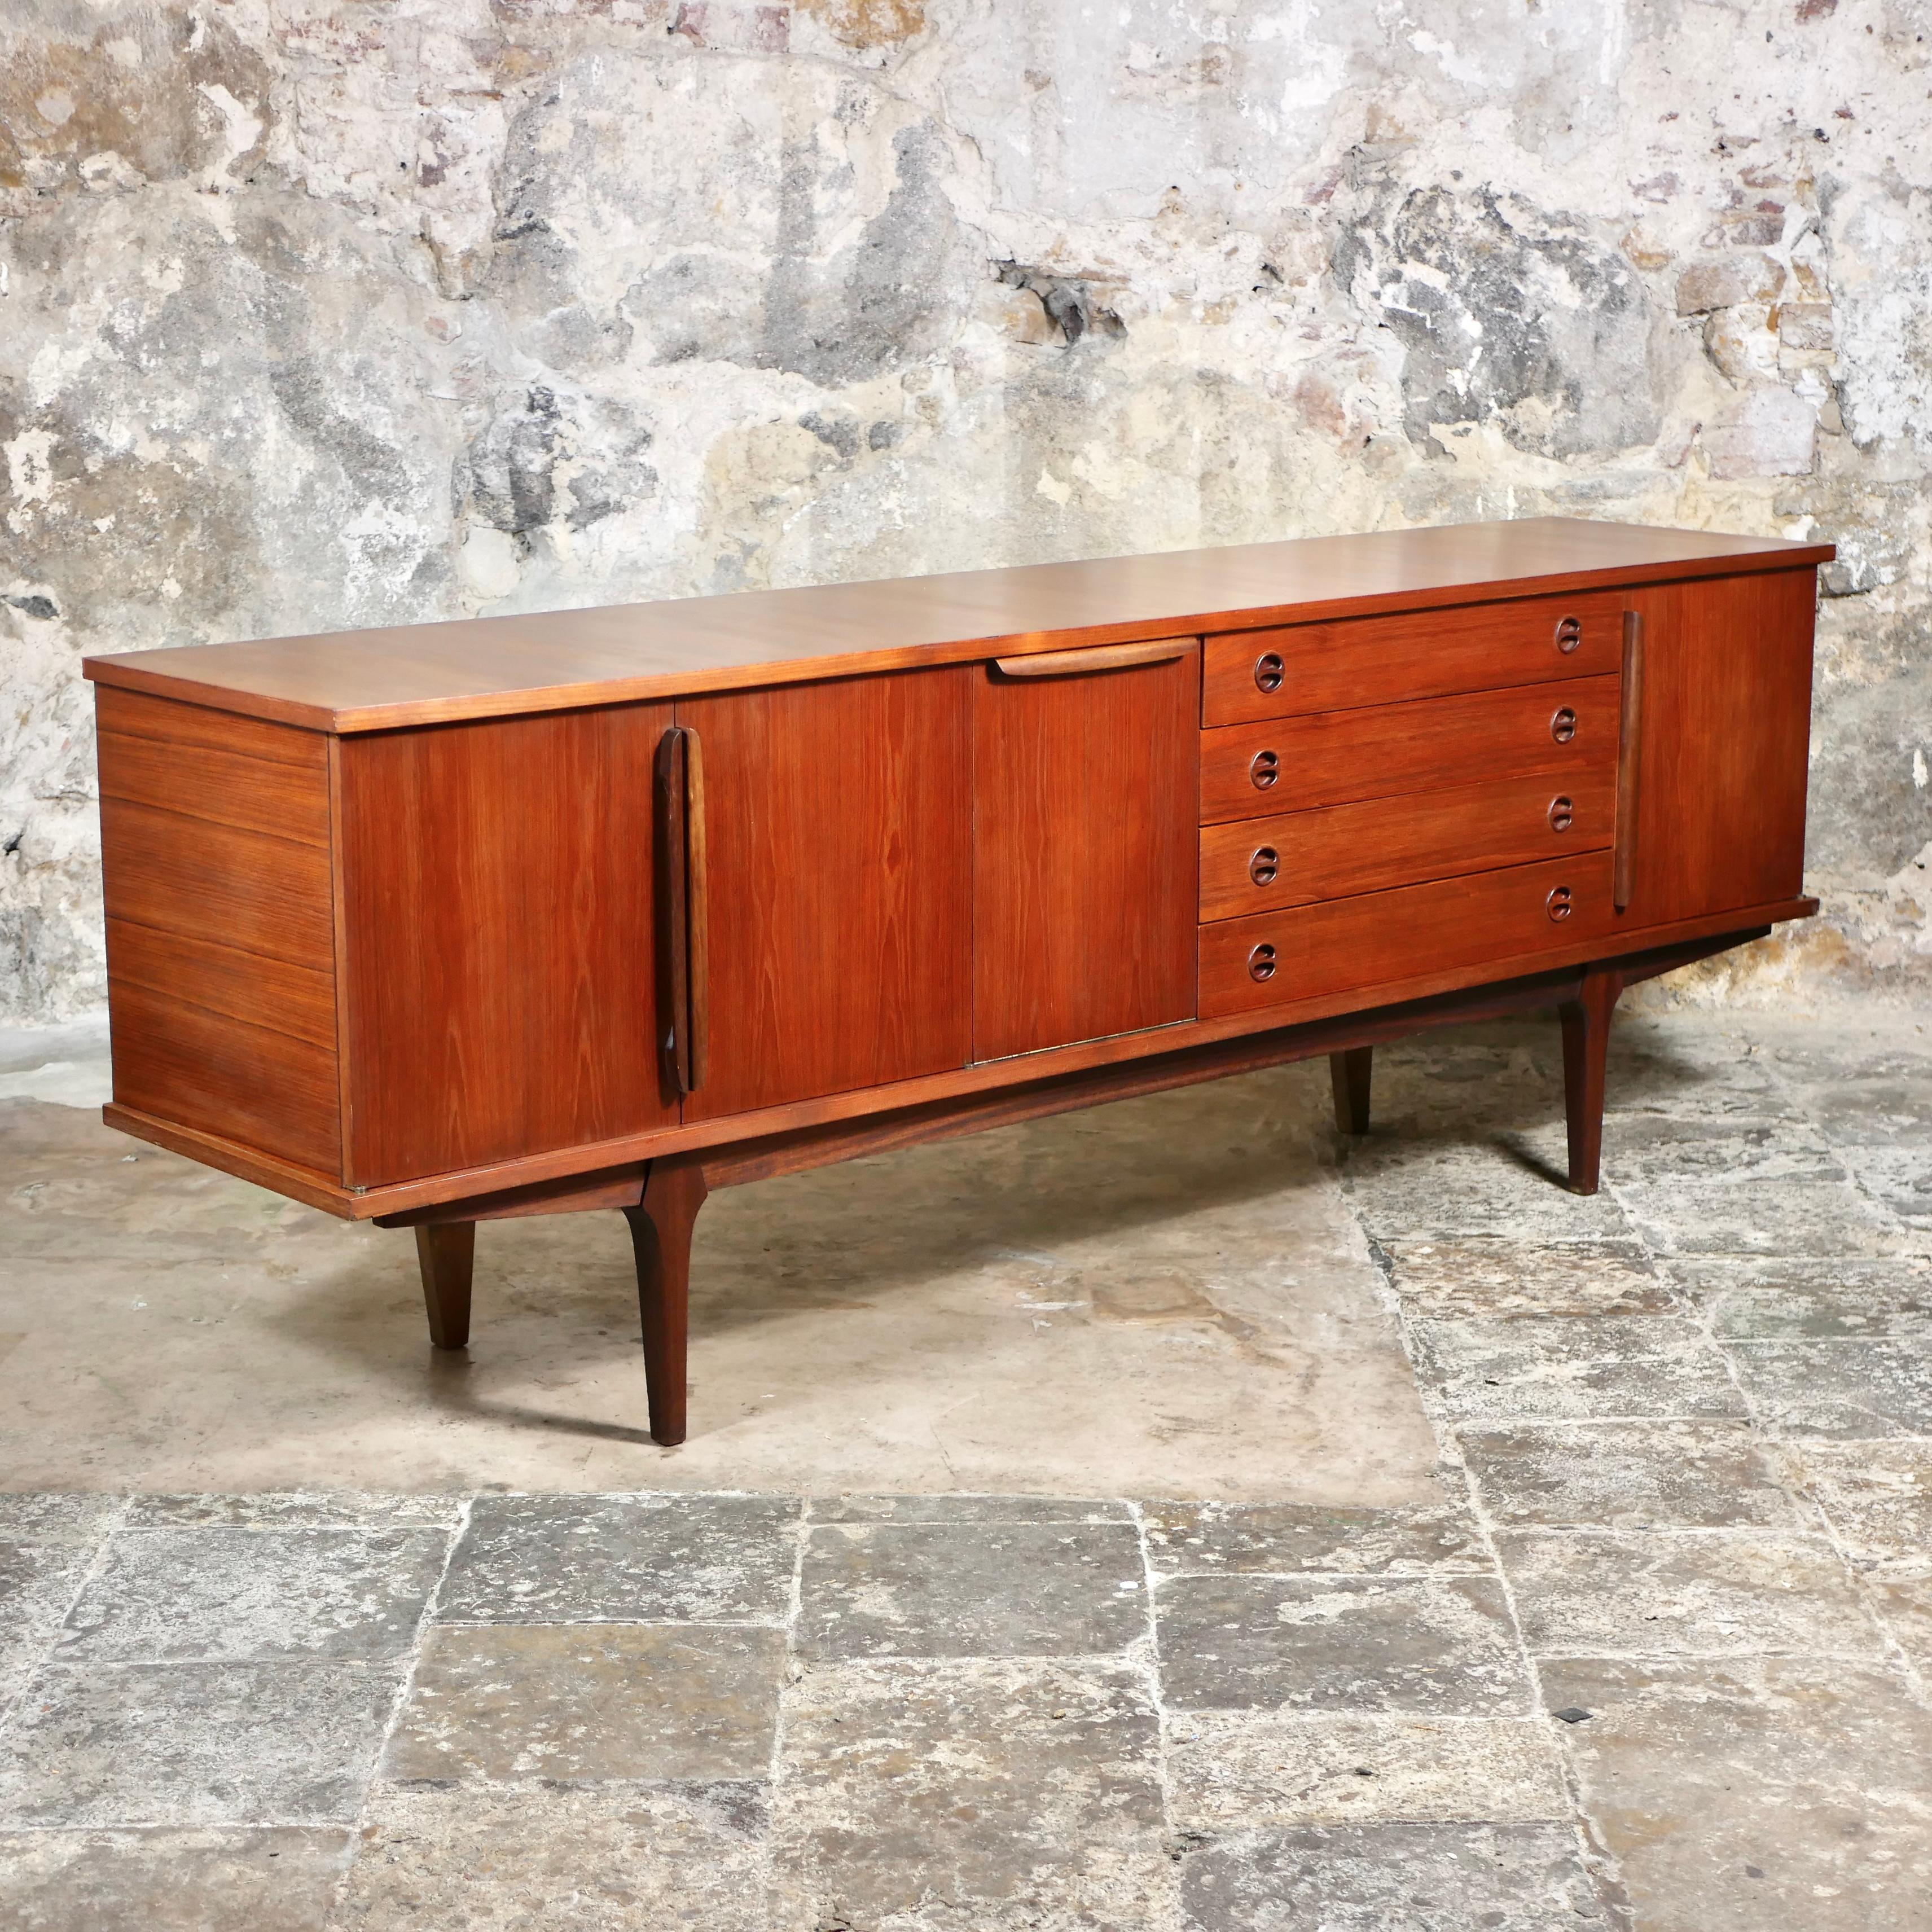 Large teak sideboard, scandinavian style, made in France in the 1960s. Great details.
Very good condition, has been sanded and oiled.
Light traces of use.
Dimensions : L230, P50, H83